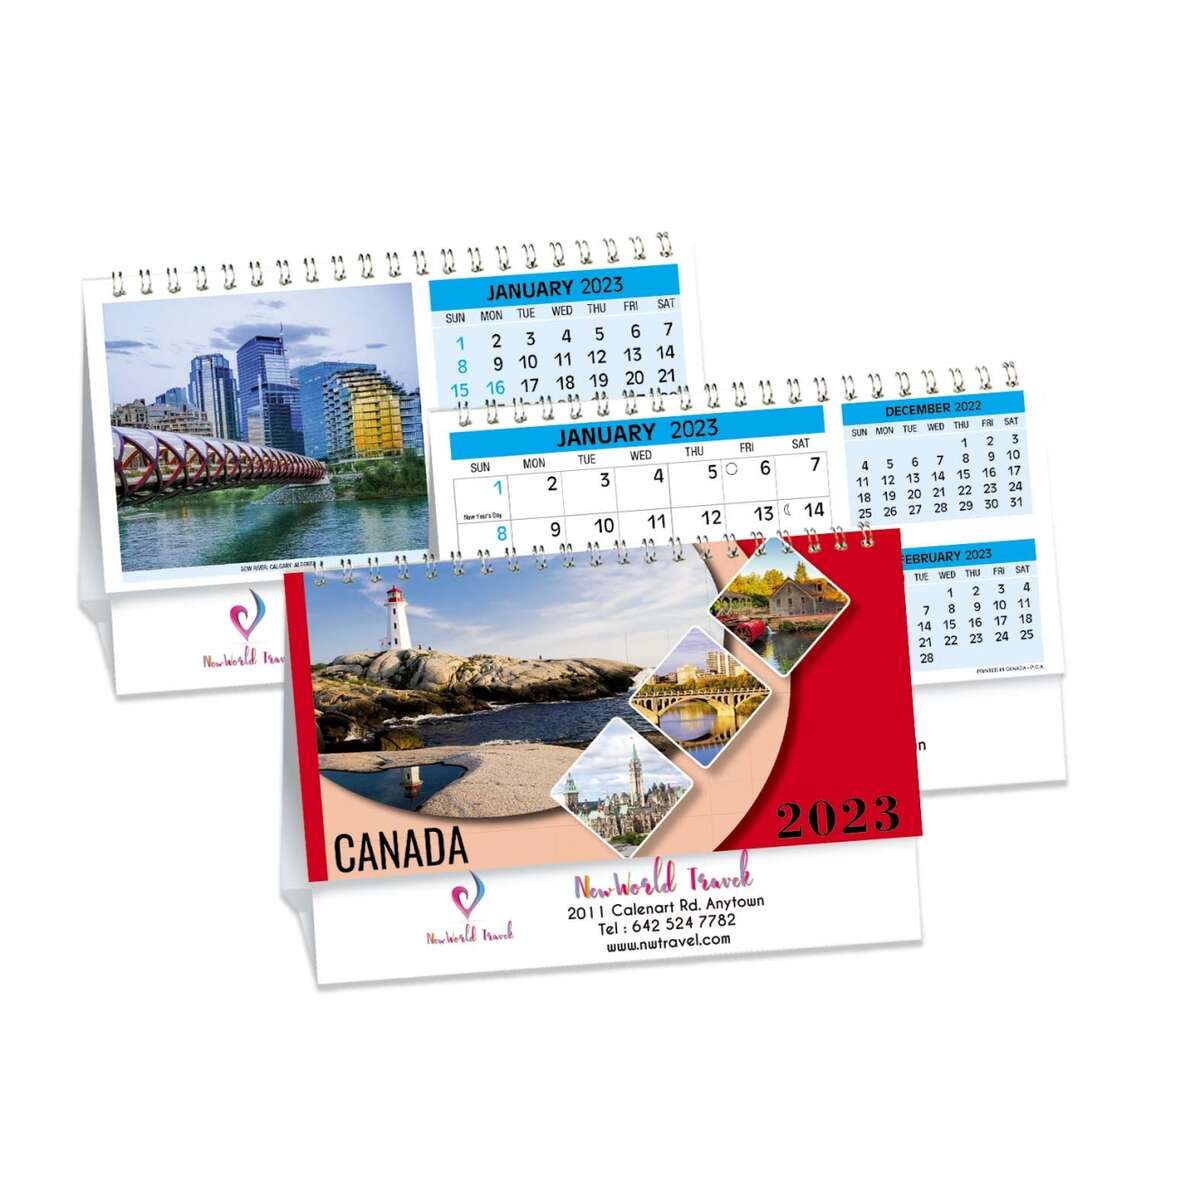 This desk calendar offers scenes of Canadian beauty and can be personalized with your business information.